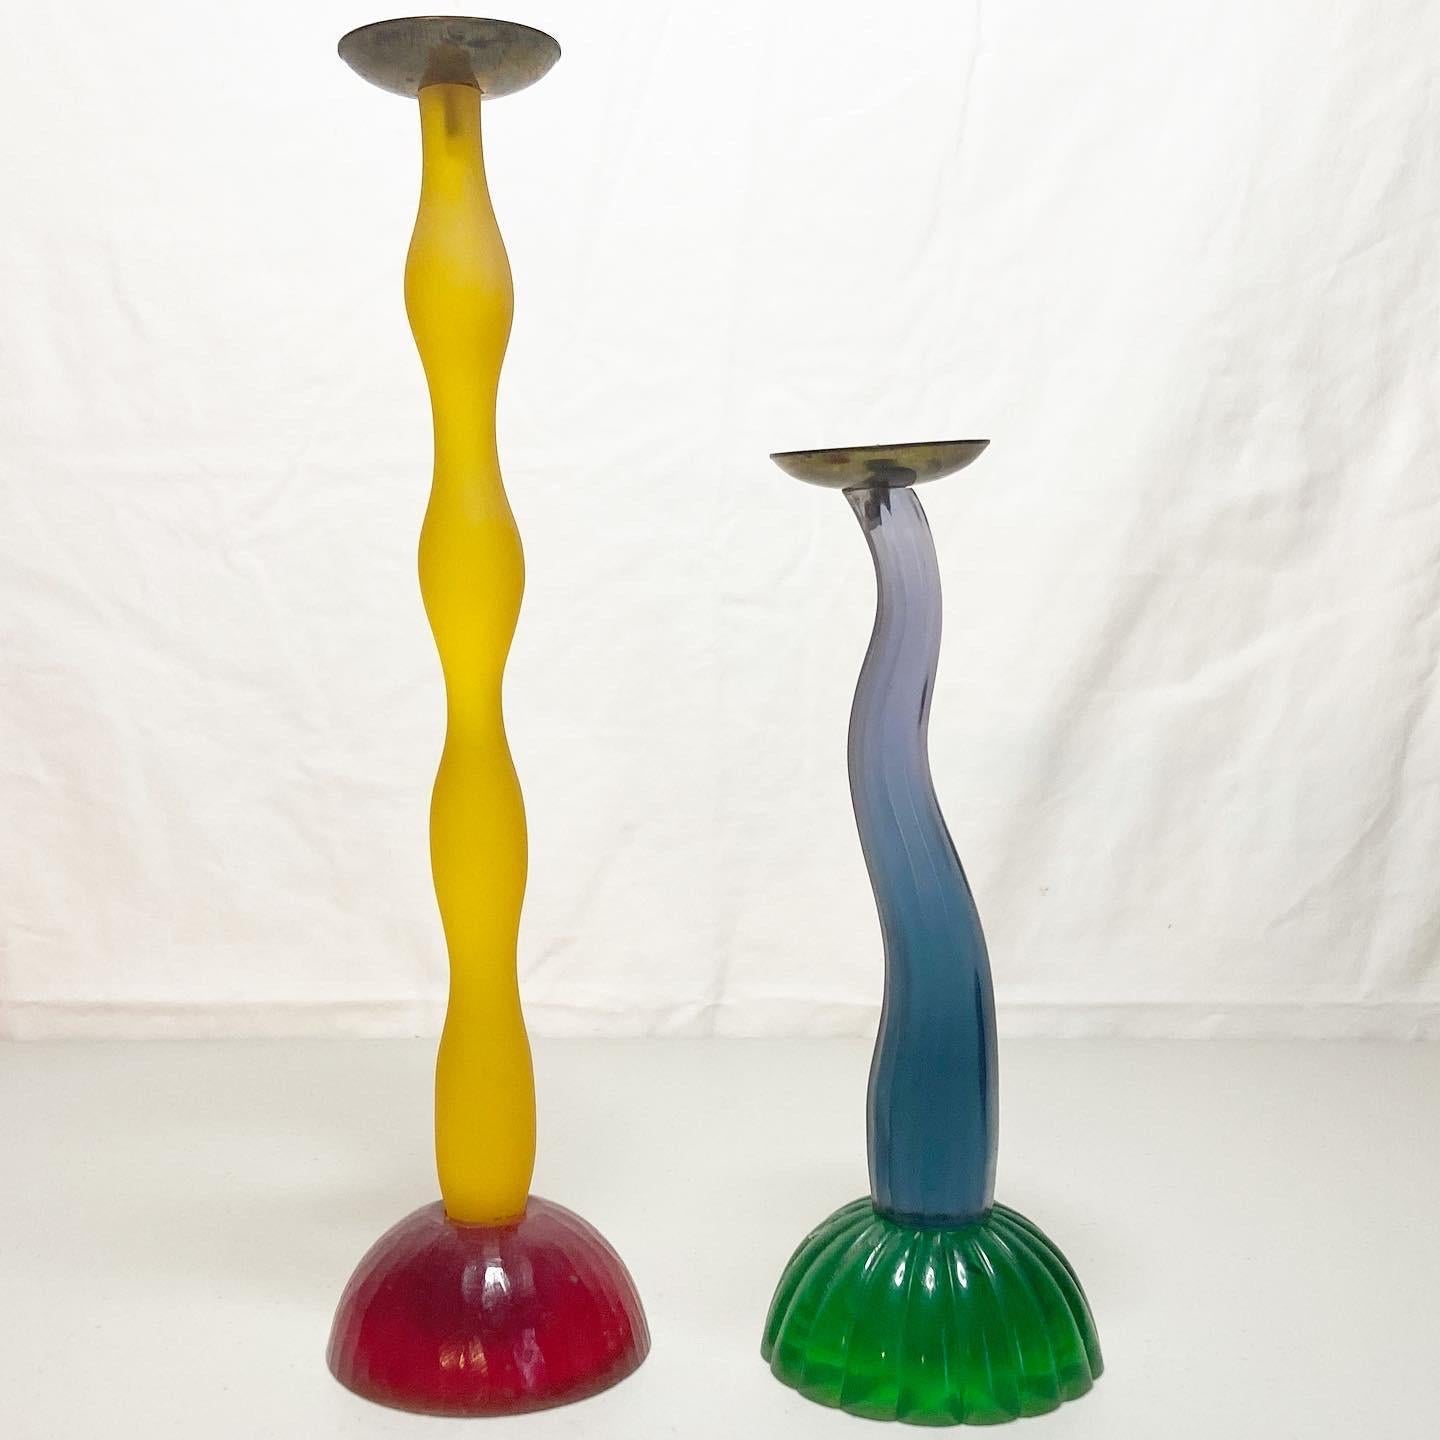 Taiwanese Vintage Postmodern Benazir Style Candlesticks - a Pair For Sale